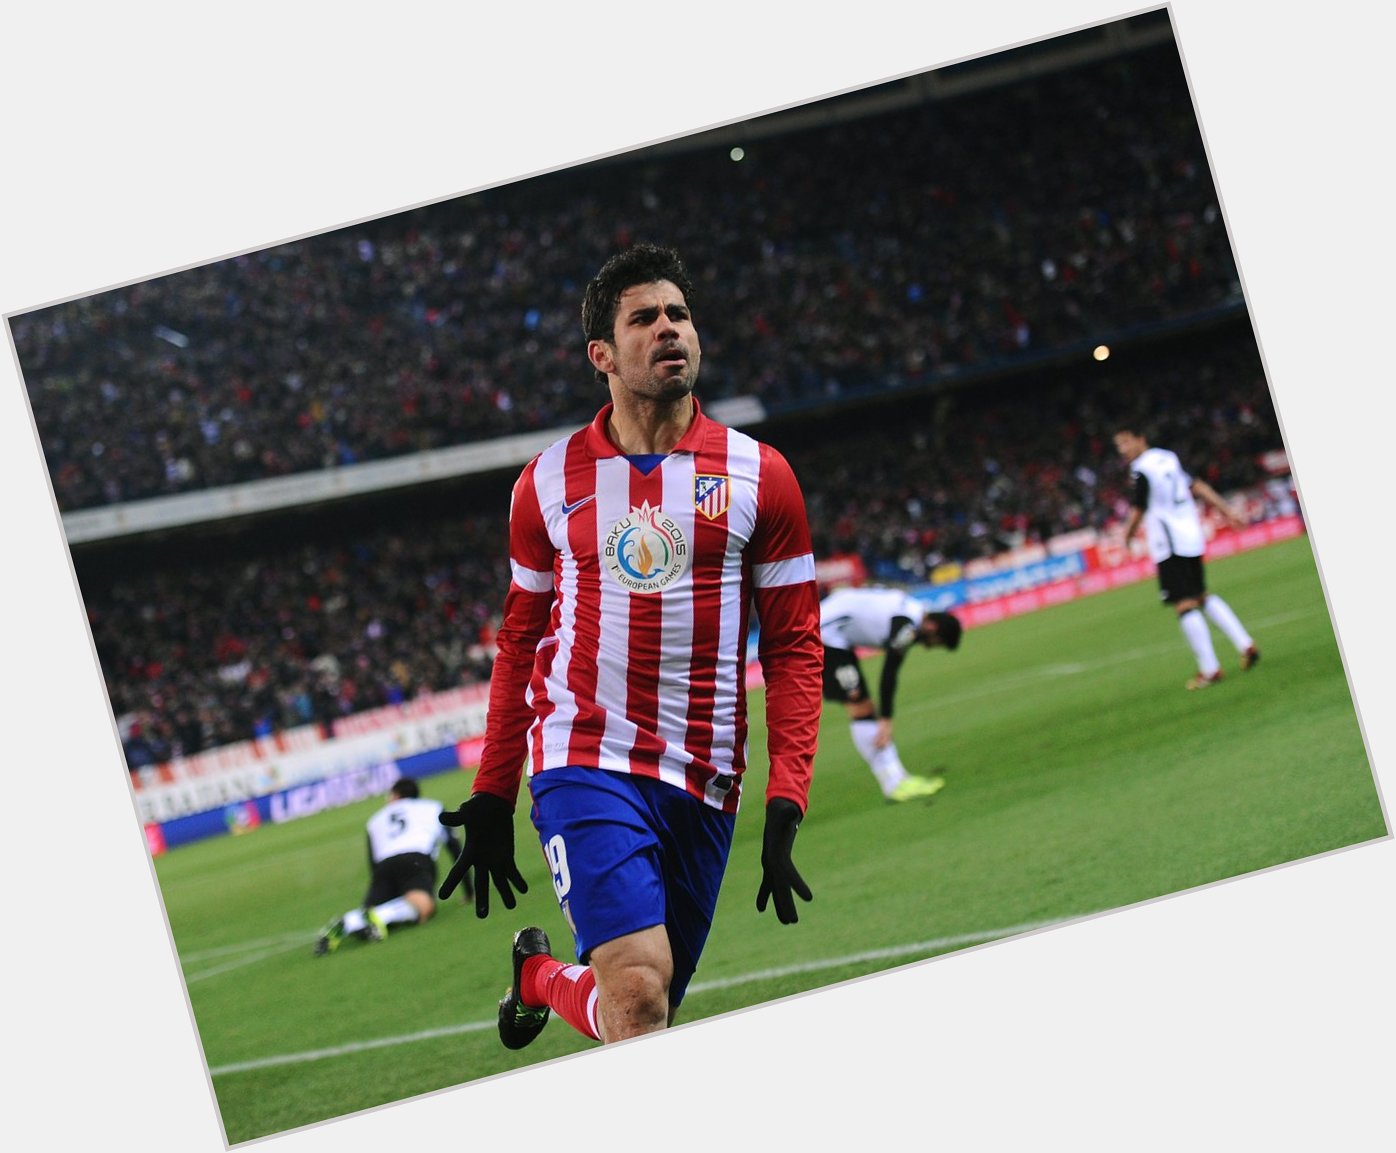 Diego Costa\s record for Atletico Madrid in all competitions:

135 games 64 goals  Happy birthday. 